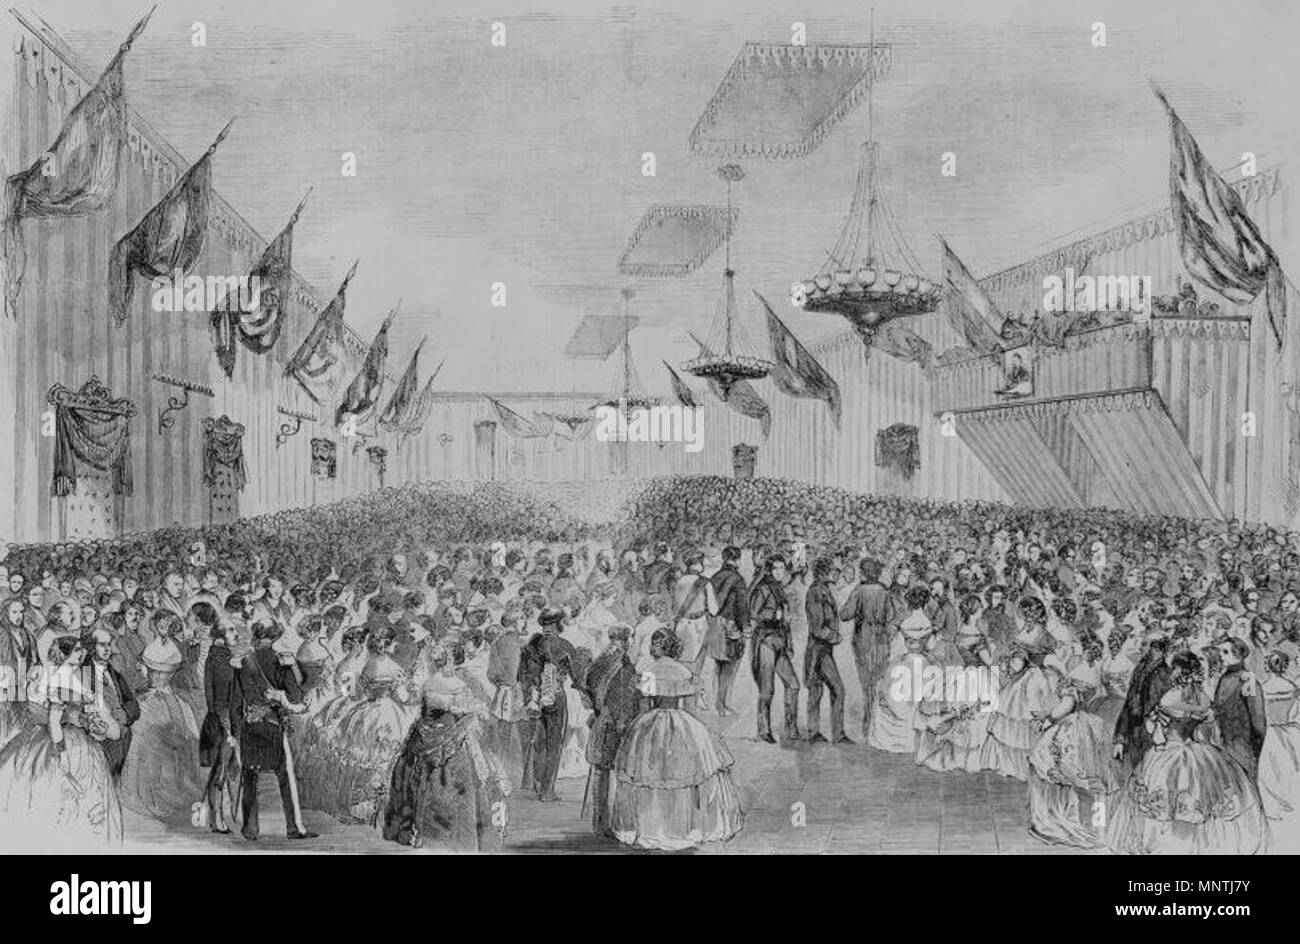 . English: The inaugural ball for president James Buchanan held in a provisional building built in Judiciary Square in Washington DC, 1857 . 3 September 2017. Unknown 1027 President James Buchanan's inaugural ball, Washington DC 1857 Stock Photo